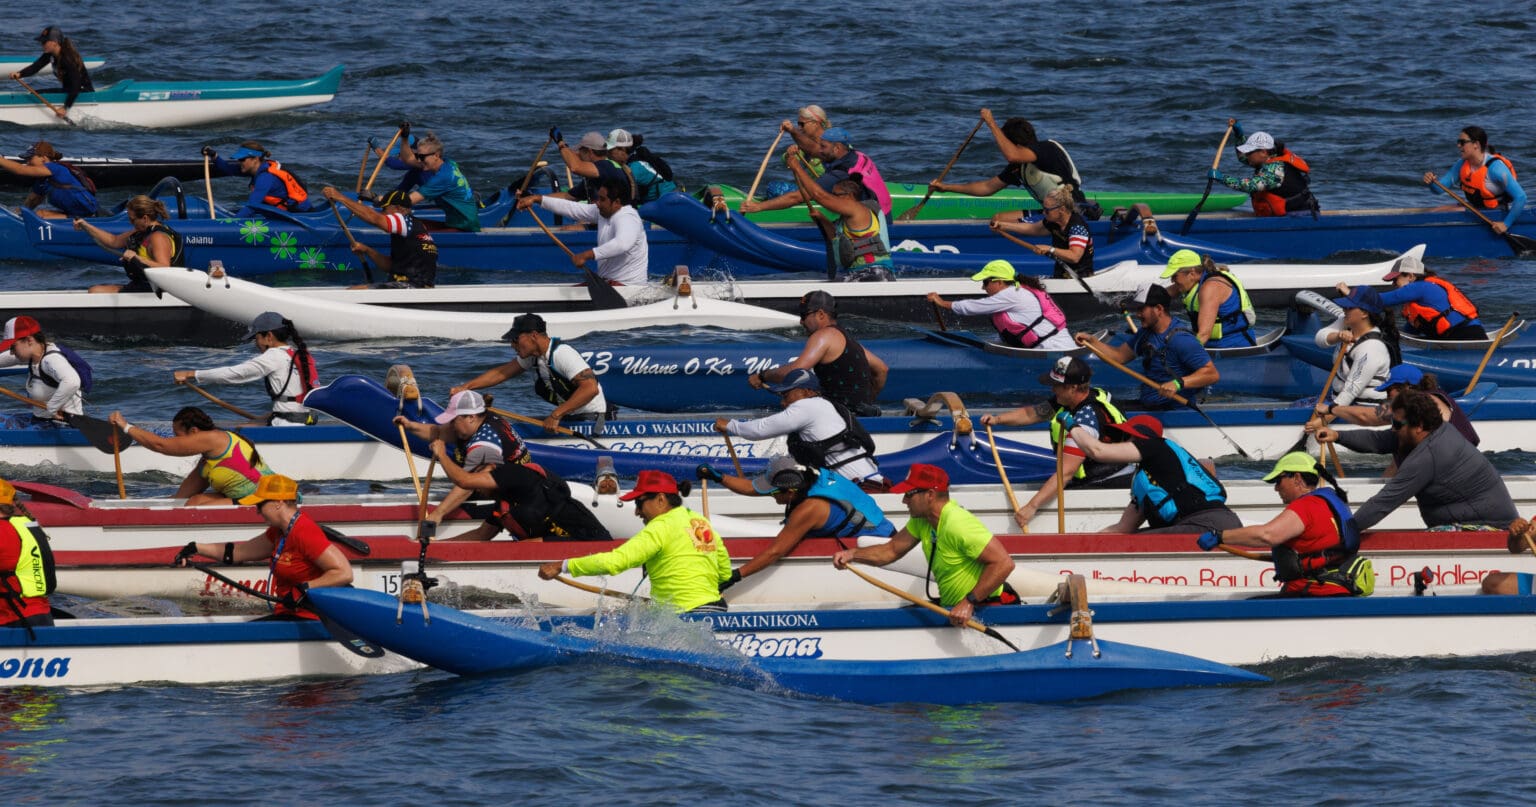 Outrigger canoers get their oars going at the start of the mixed/women’s races Saturday